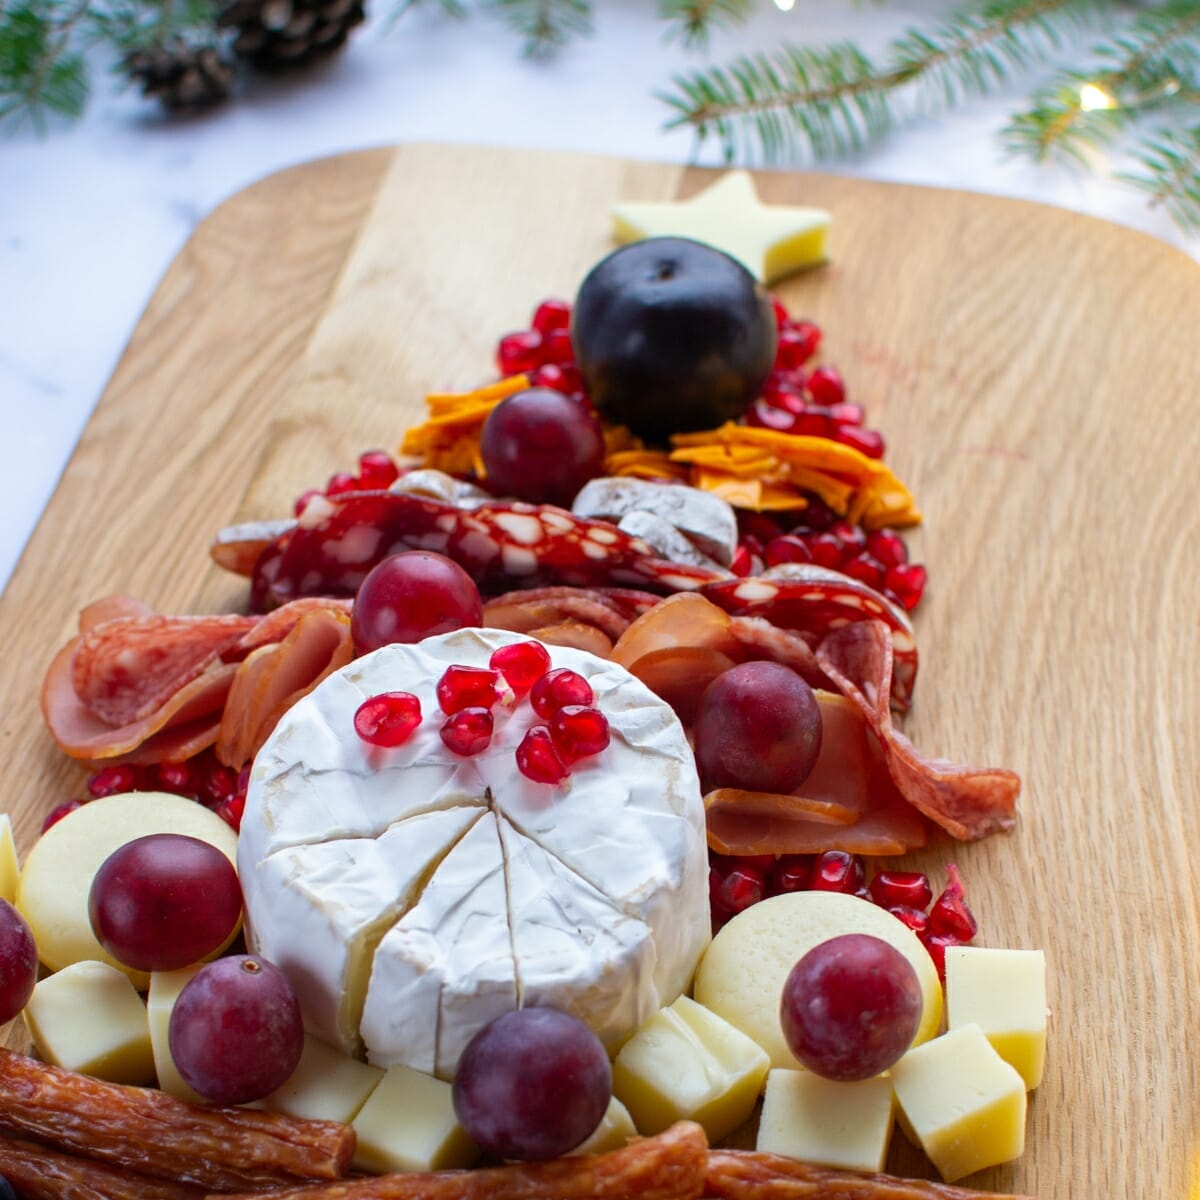 new year's eve charcuterie board - cheese pomegranate seeds and deli meat slices shaped like a christmas tree